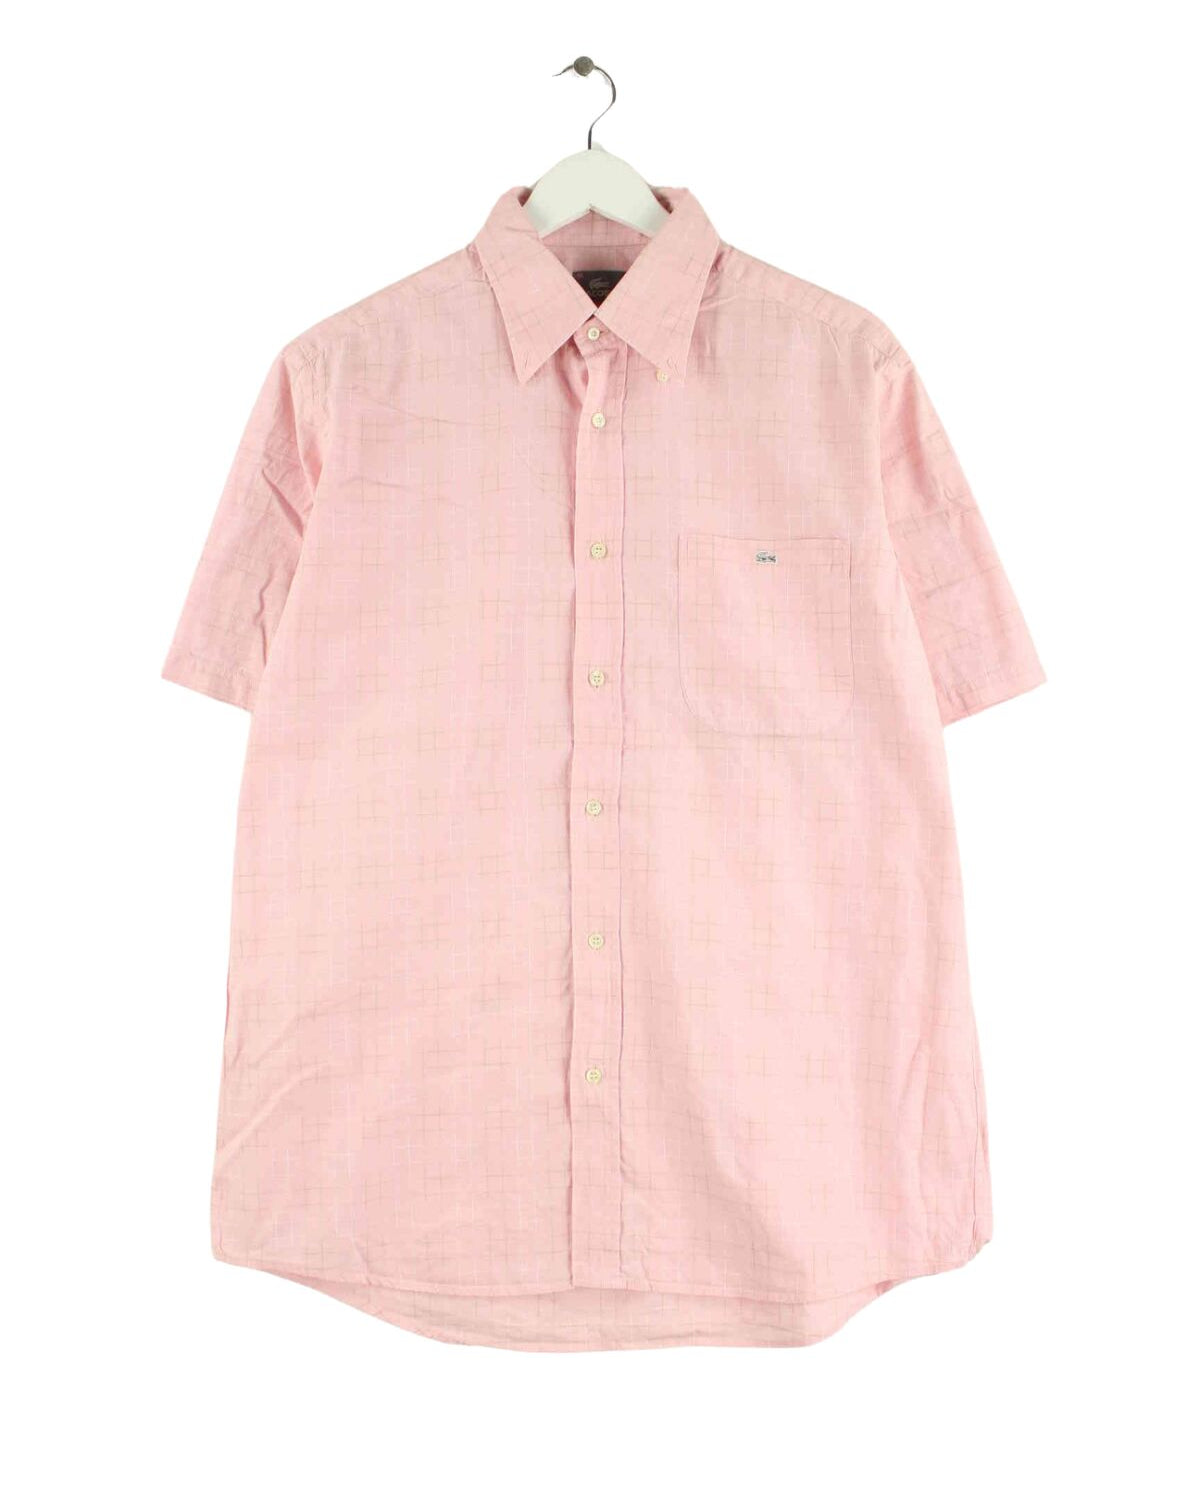 Lacoste Striped Hemd Pink XL (front image)